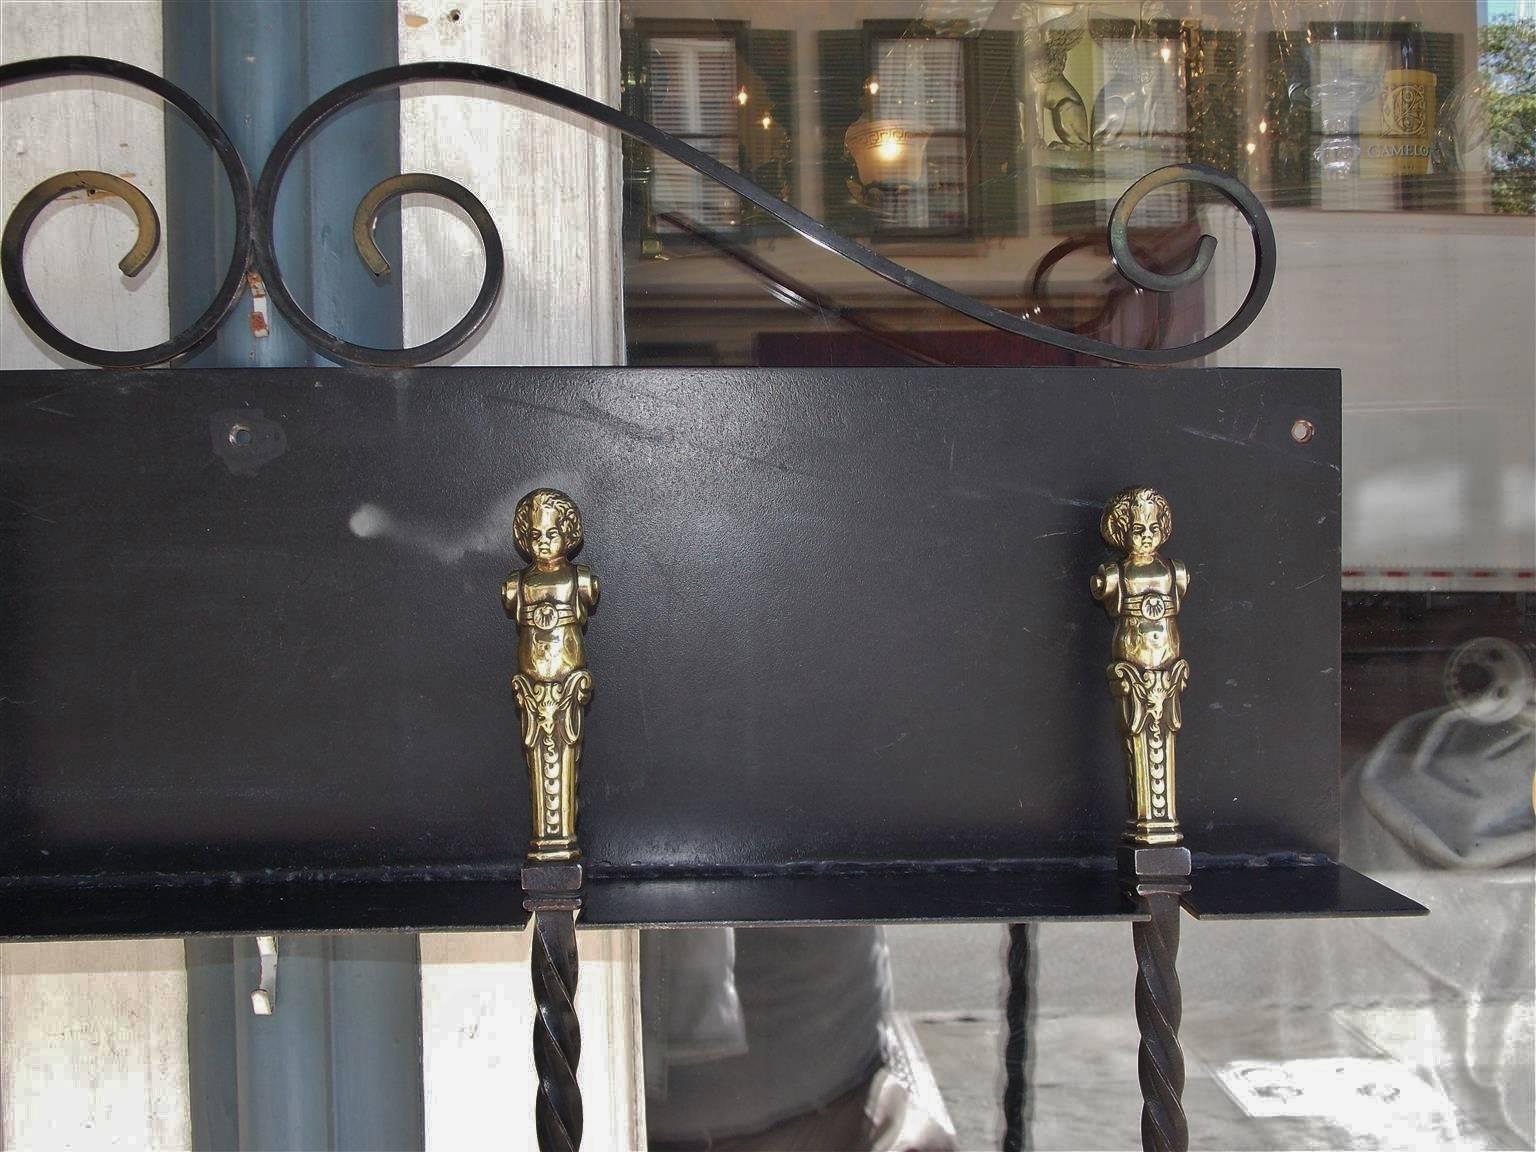 Set of Four Italian Brass and Wrought Iron Fire Tools on Bracket, Circa 1780 For Sale 2